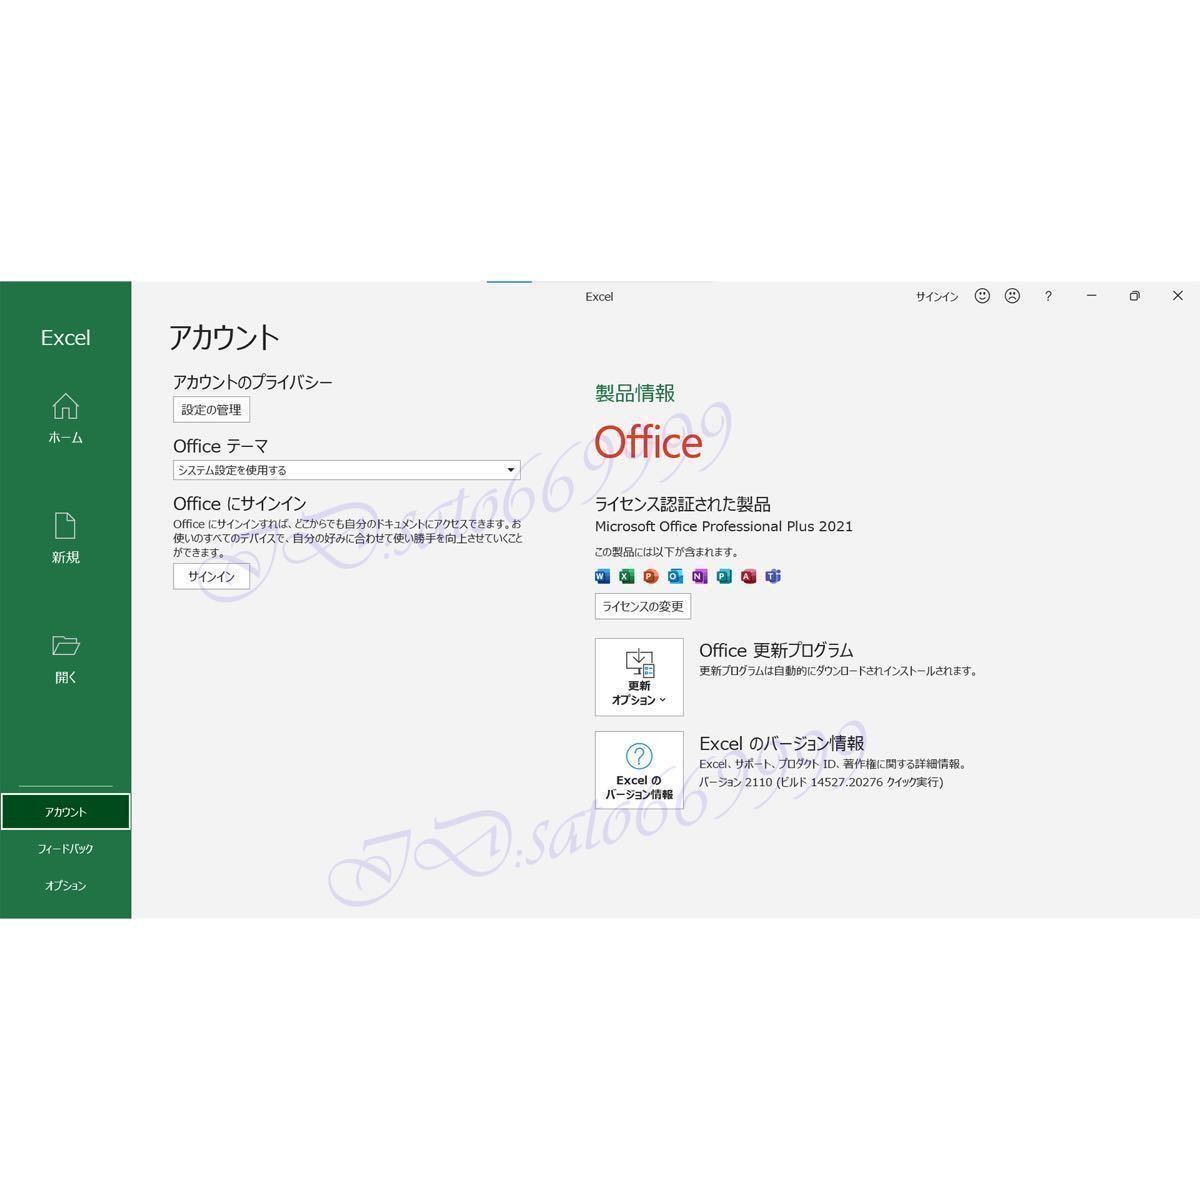 【5PC用】Microsoft Office 2021 Professional Plus 永年正規品プロダクトキー☆ Access Word Excel PowerPoint 認証保証日本語手順書付き _画像6